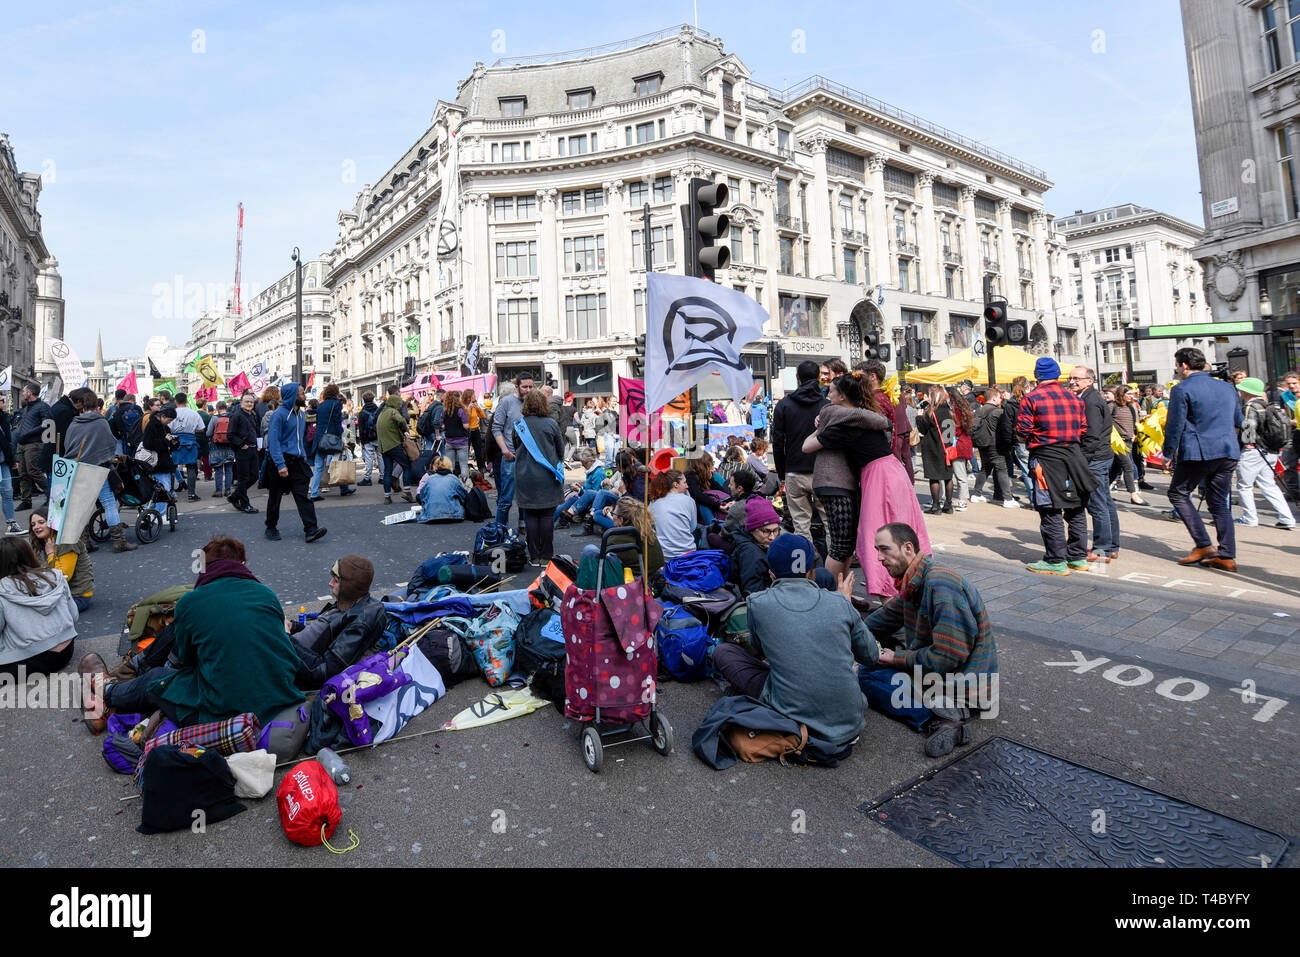 London, UK.  15 April 2019. People occupy Oxford Circus during "London: International Rebellion", a protest organised by Extinction Rebellion, demanding that governments take action against climate change.  Marble Arch, Oxford Circus, Piccadilly Circus, Waterloo Bridge and Parliament Square have been blocked by activists.  According to the organiser, similar protests are taking place in 80 other cities around the world.    Credit: Stephen Chung / Alamy Live News Stock Photo